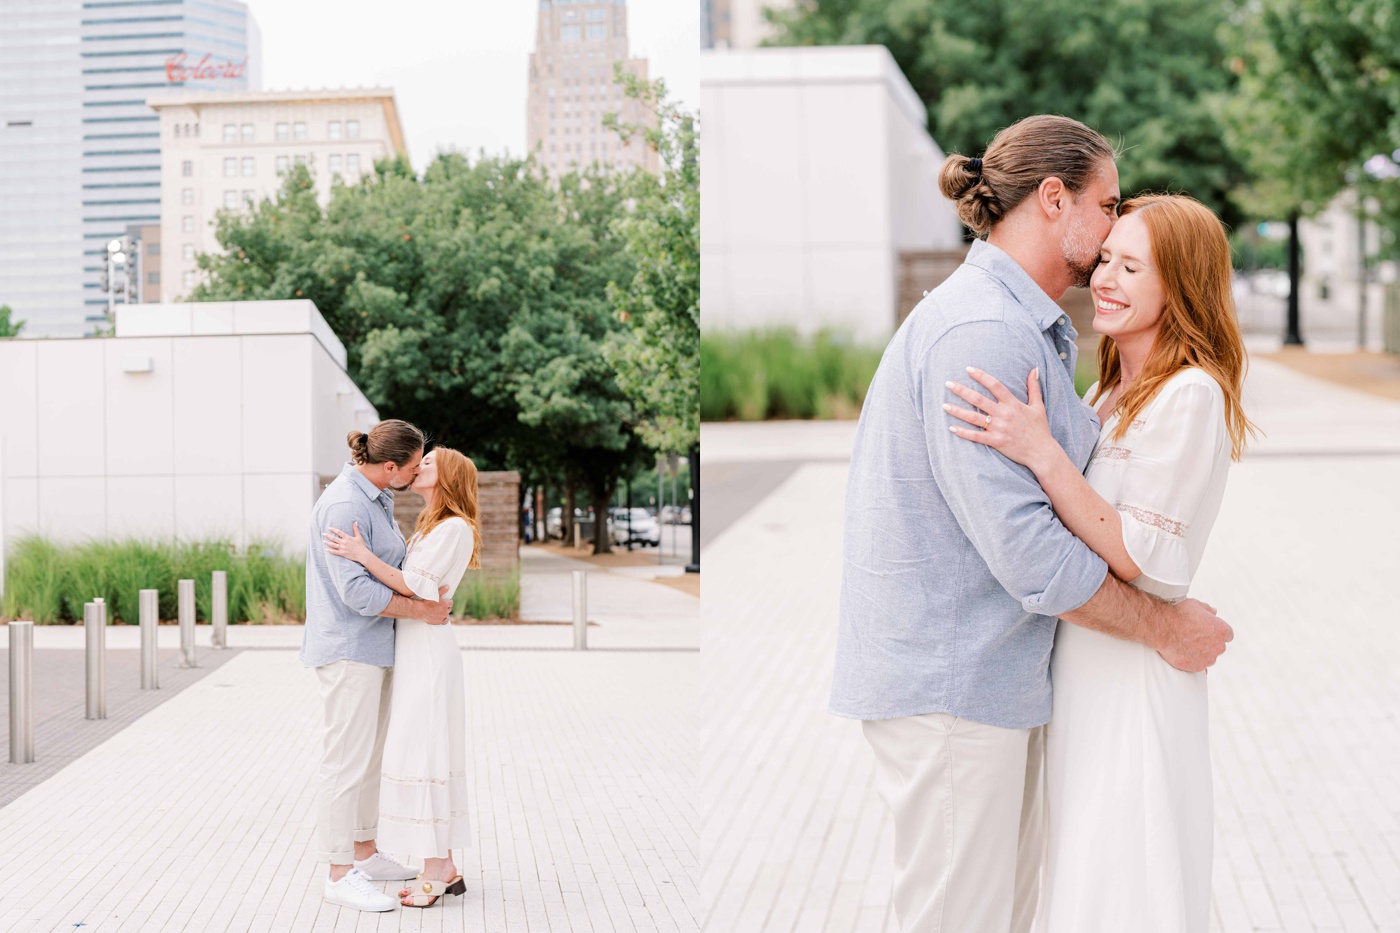 Oklahoma City engagement session locations